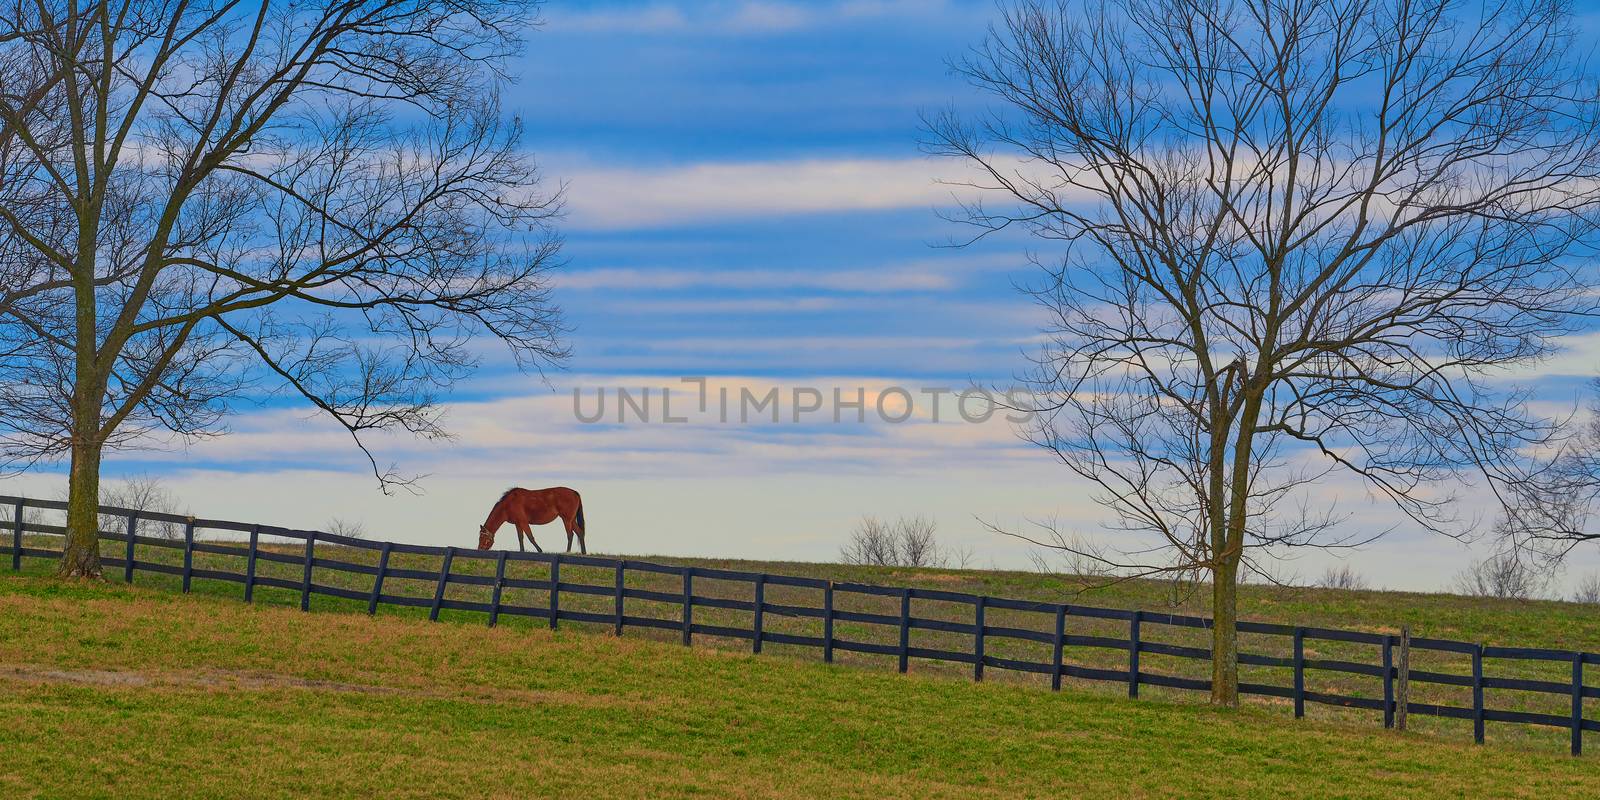 Thoroughbred horse grazing in a field. by patrickstock